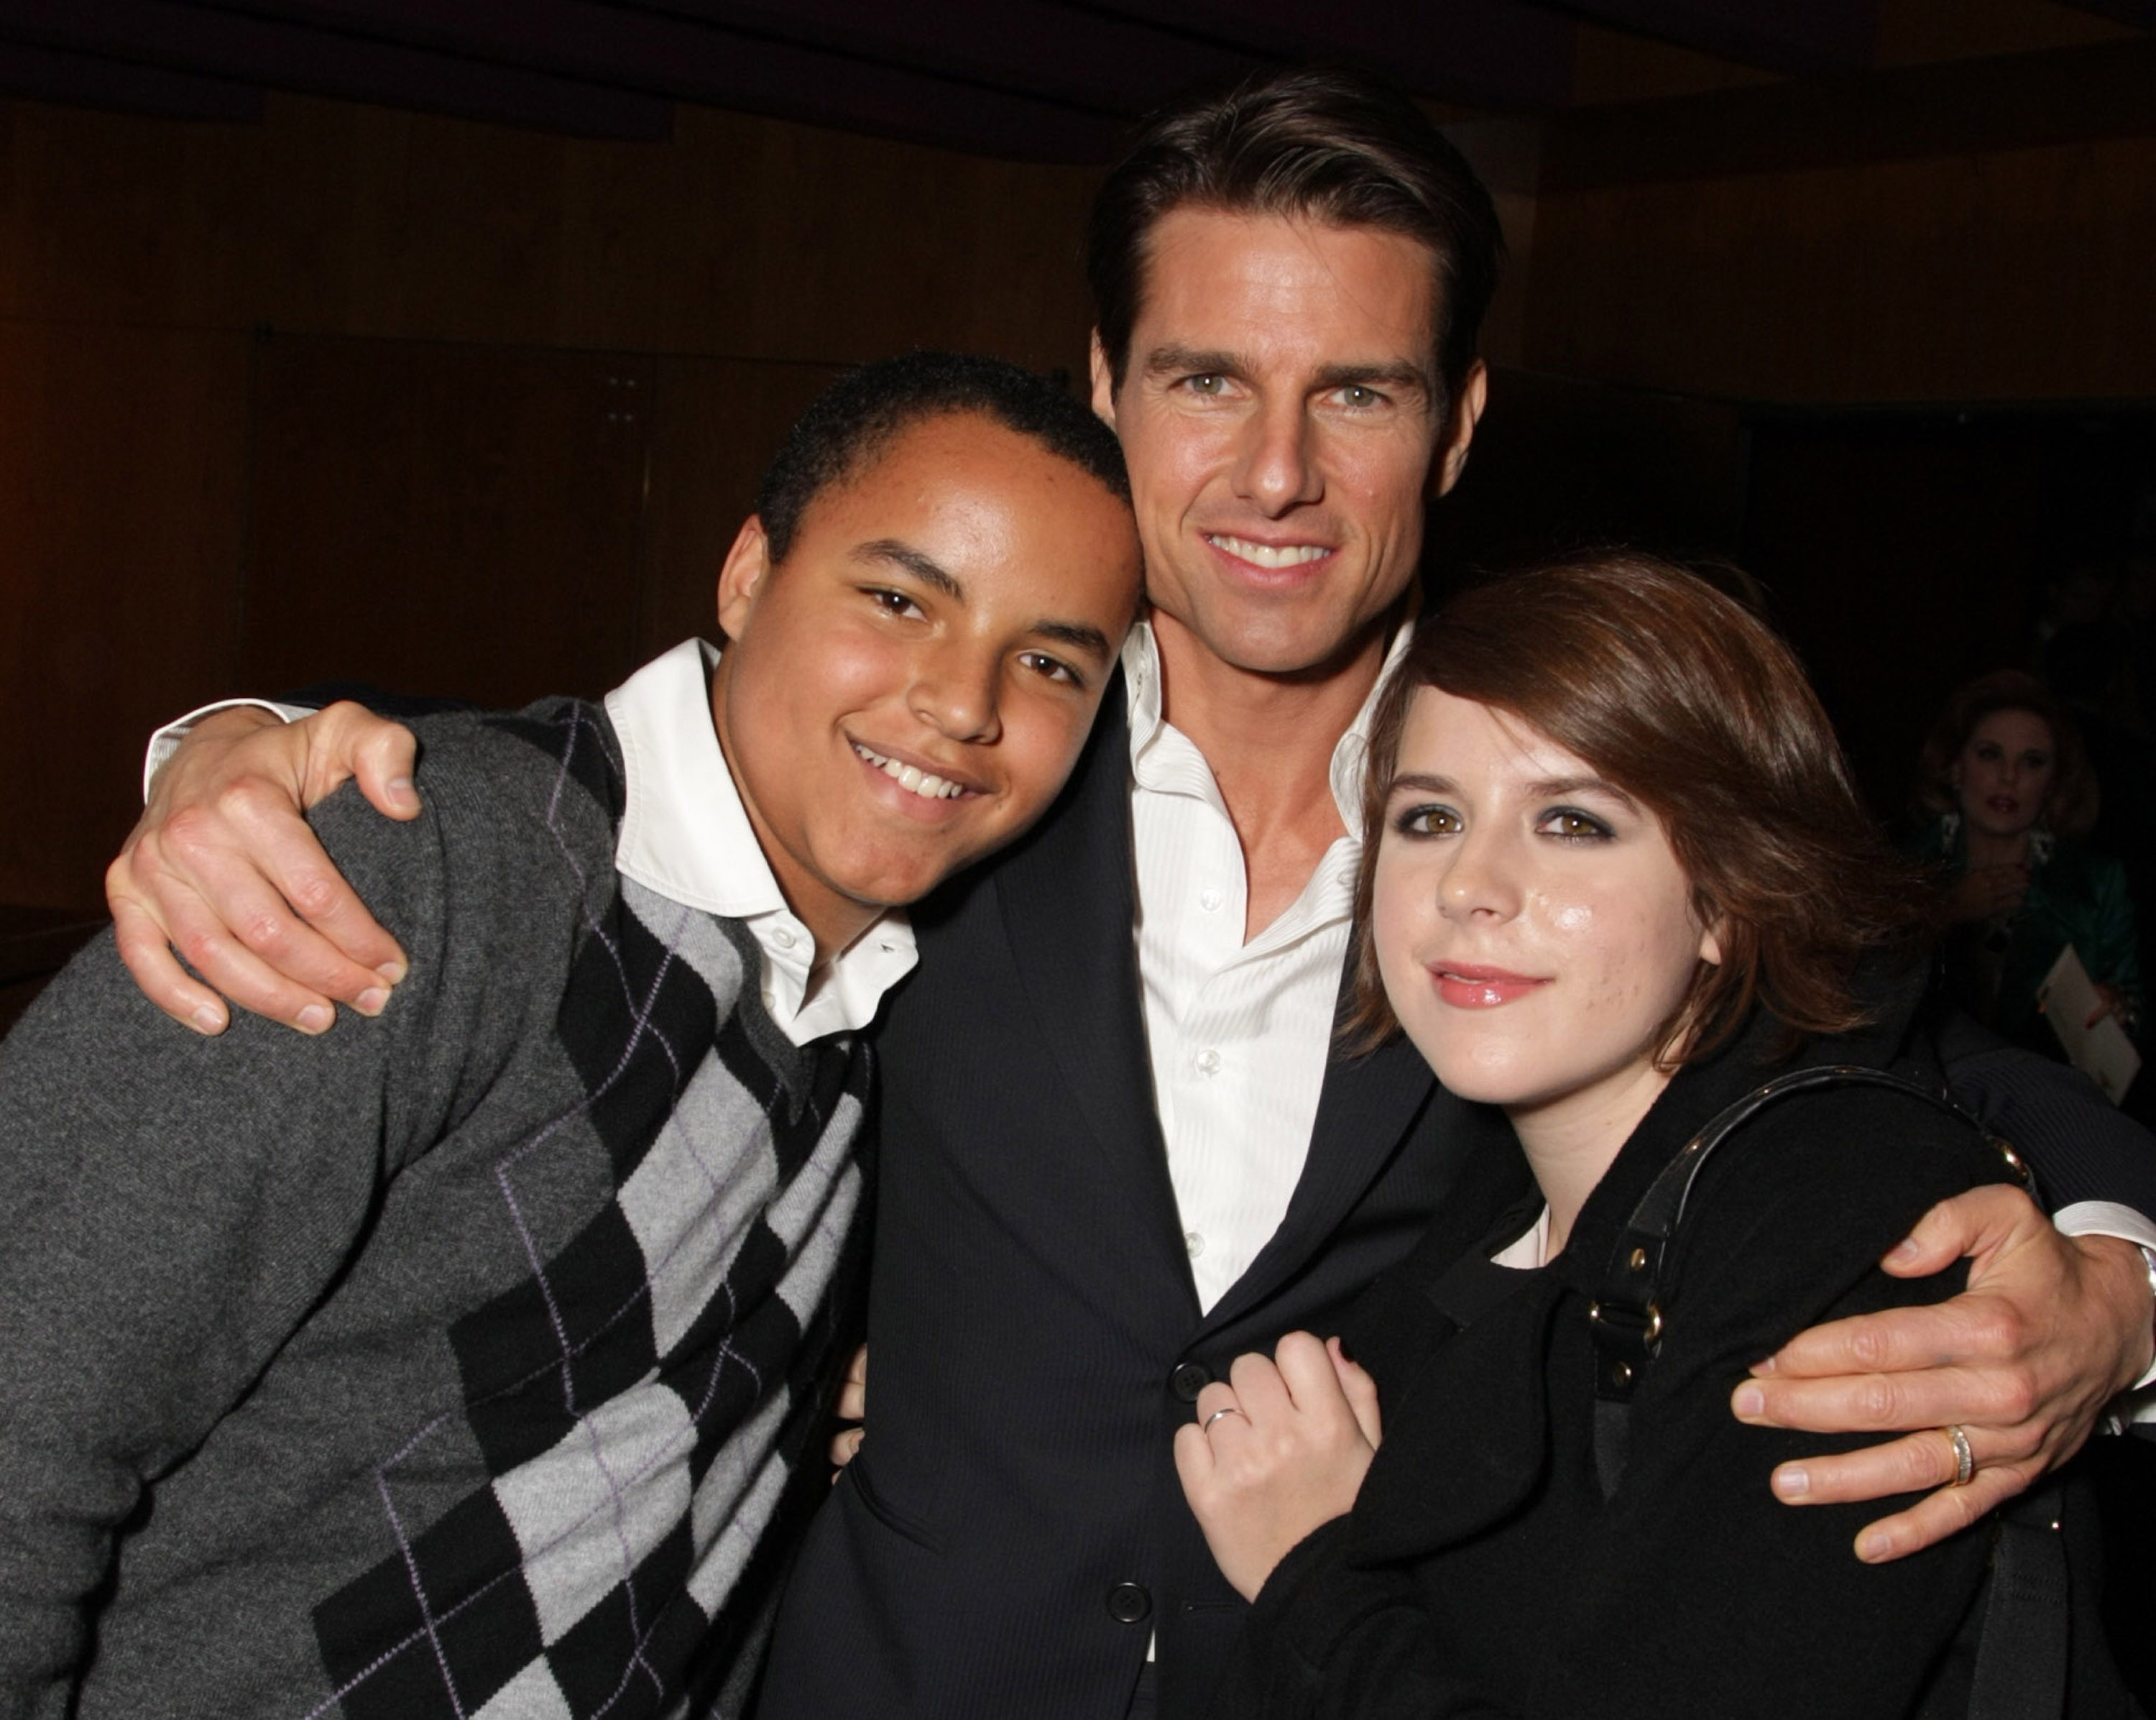 Connor, Tom, and Isabella Cruise at United Artists Pictures and MGM premiere of "Valkyrie" in Los Angeles, California, on December 18, 2008 | Source: Getty Images